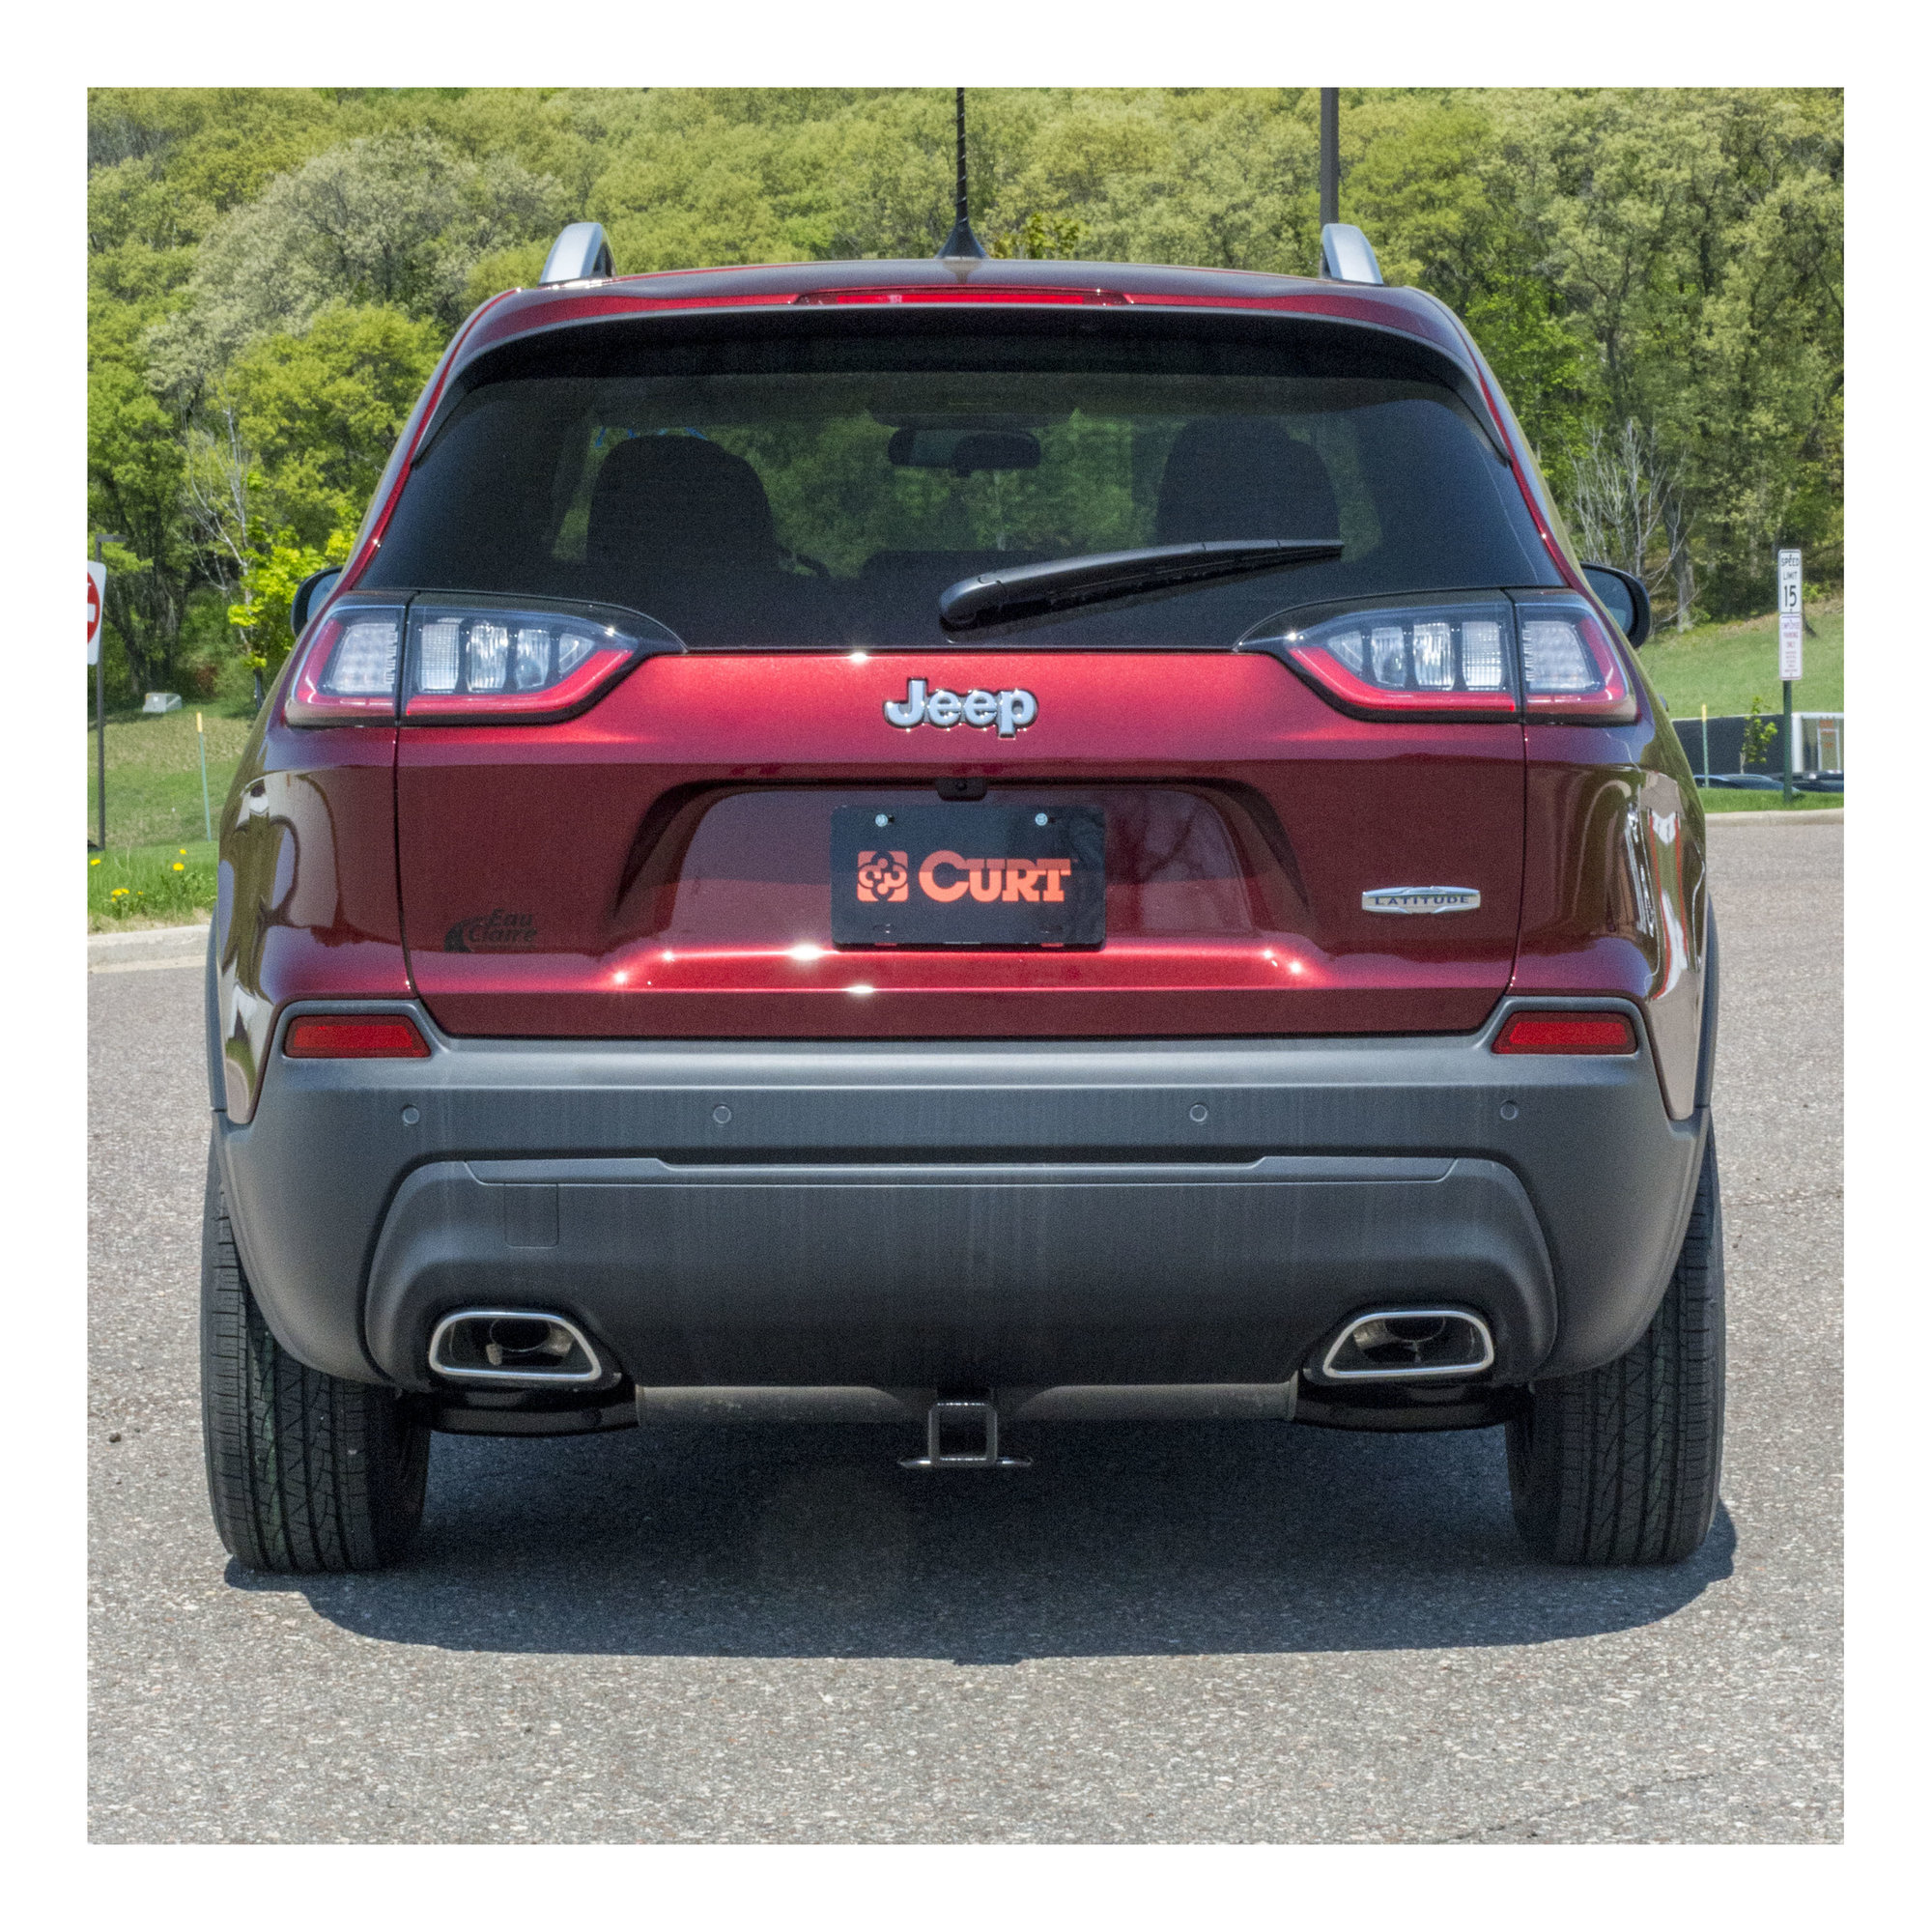 Trailer Hitch For 2018 Jeep Grand Cherokee